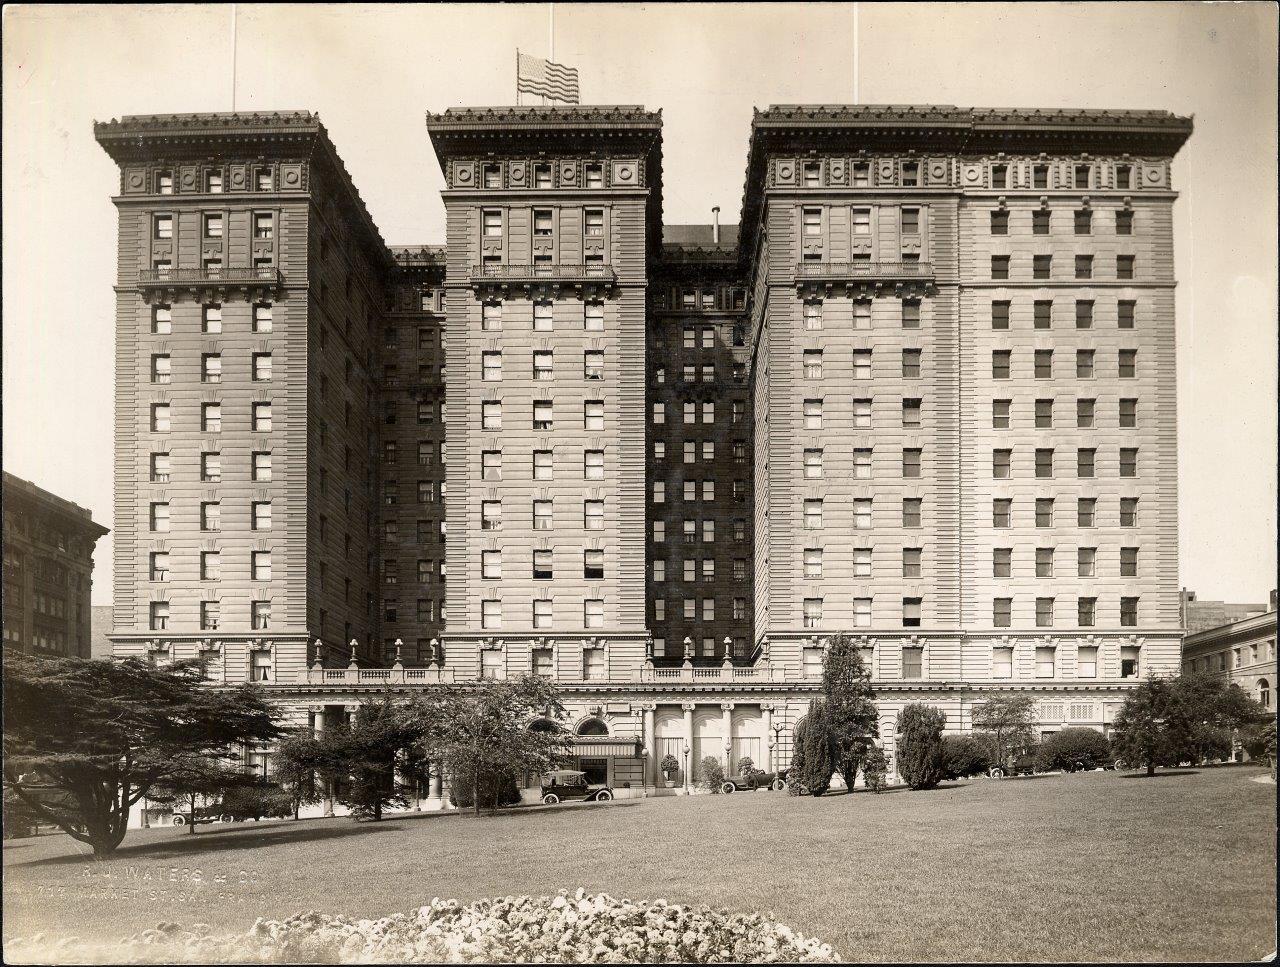 A photograph shows a multistory hotel building.